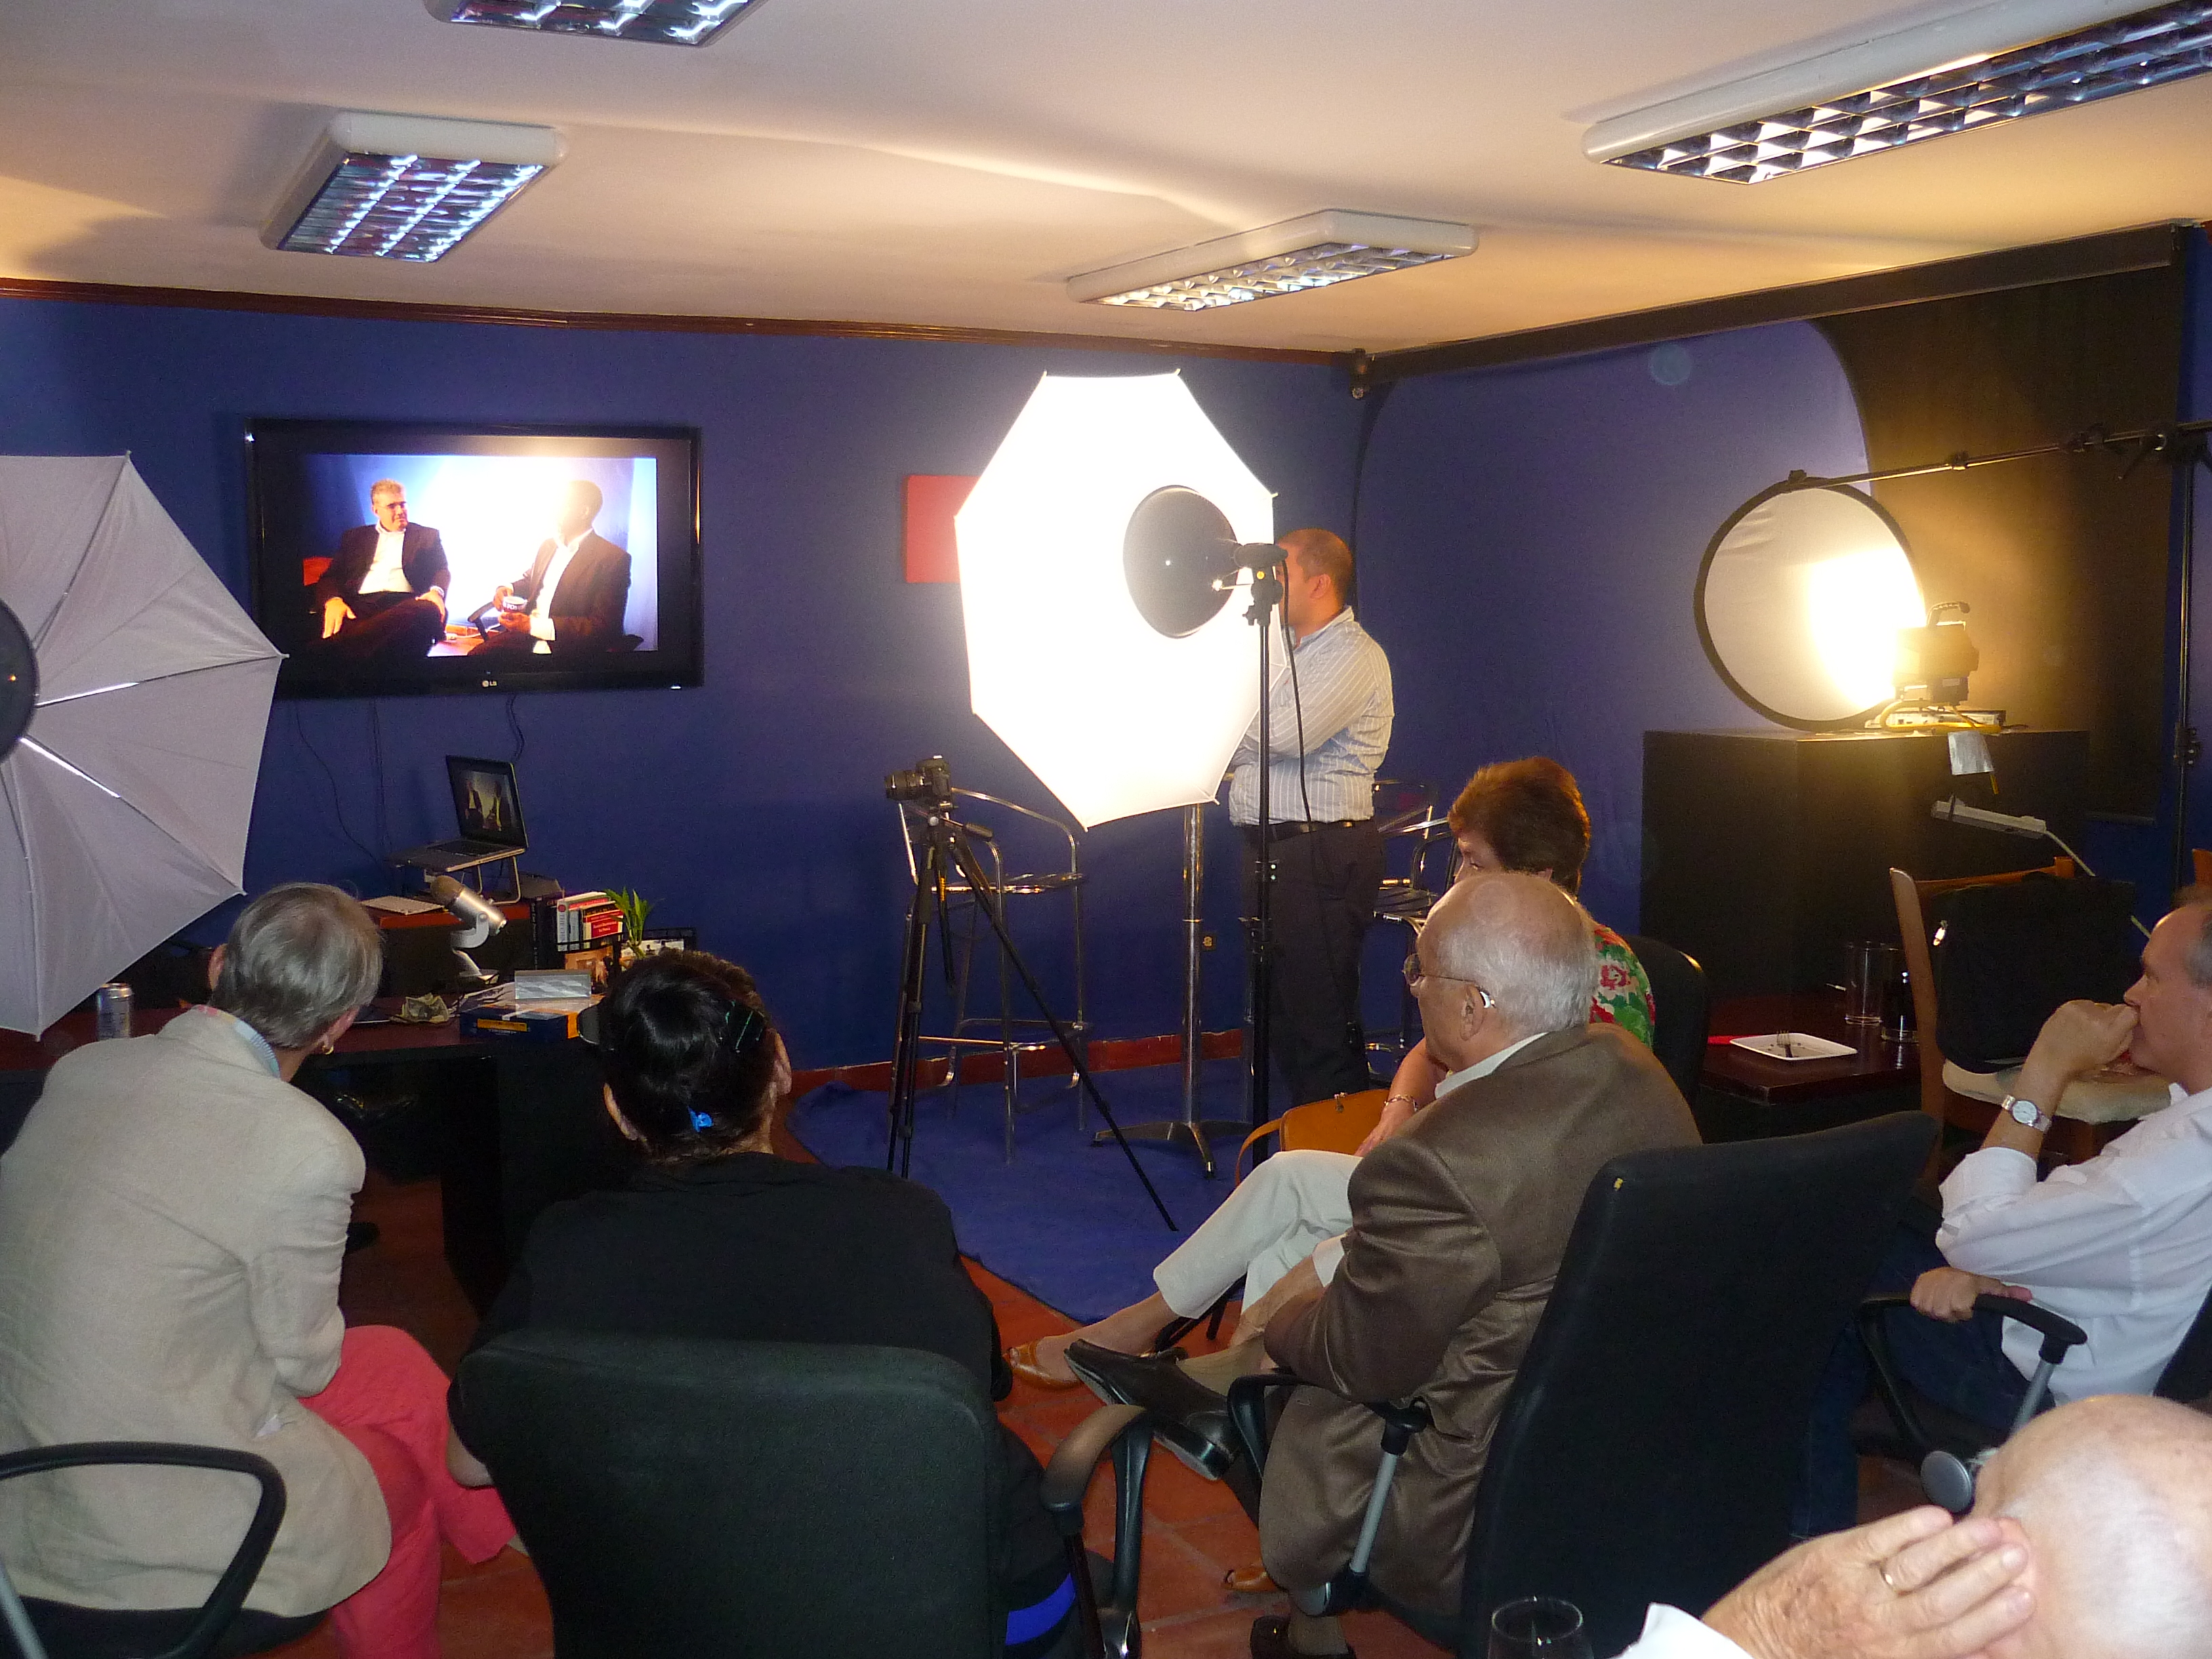 behind the scenes for Web Show the Ready Room during 2012 elections